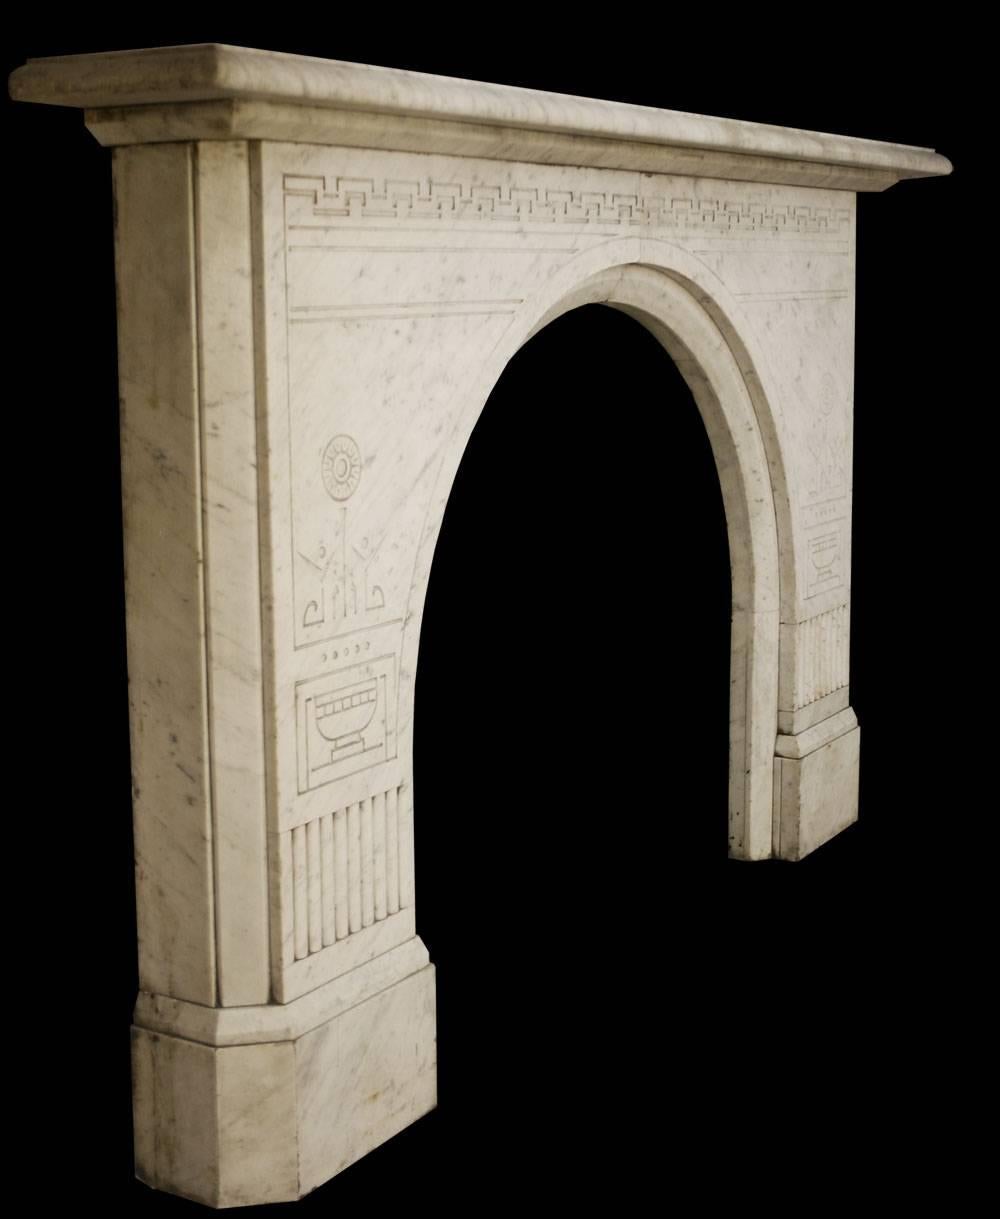 Unusual antique Victorian Carrara white marble fireplace with an arched aperture and fine aesthetic detail.

Images prior to restoration. This chimneypiece is awaiting restoration, please enquire as to the lead time to complete the restoration